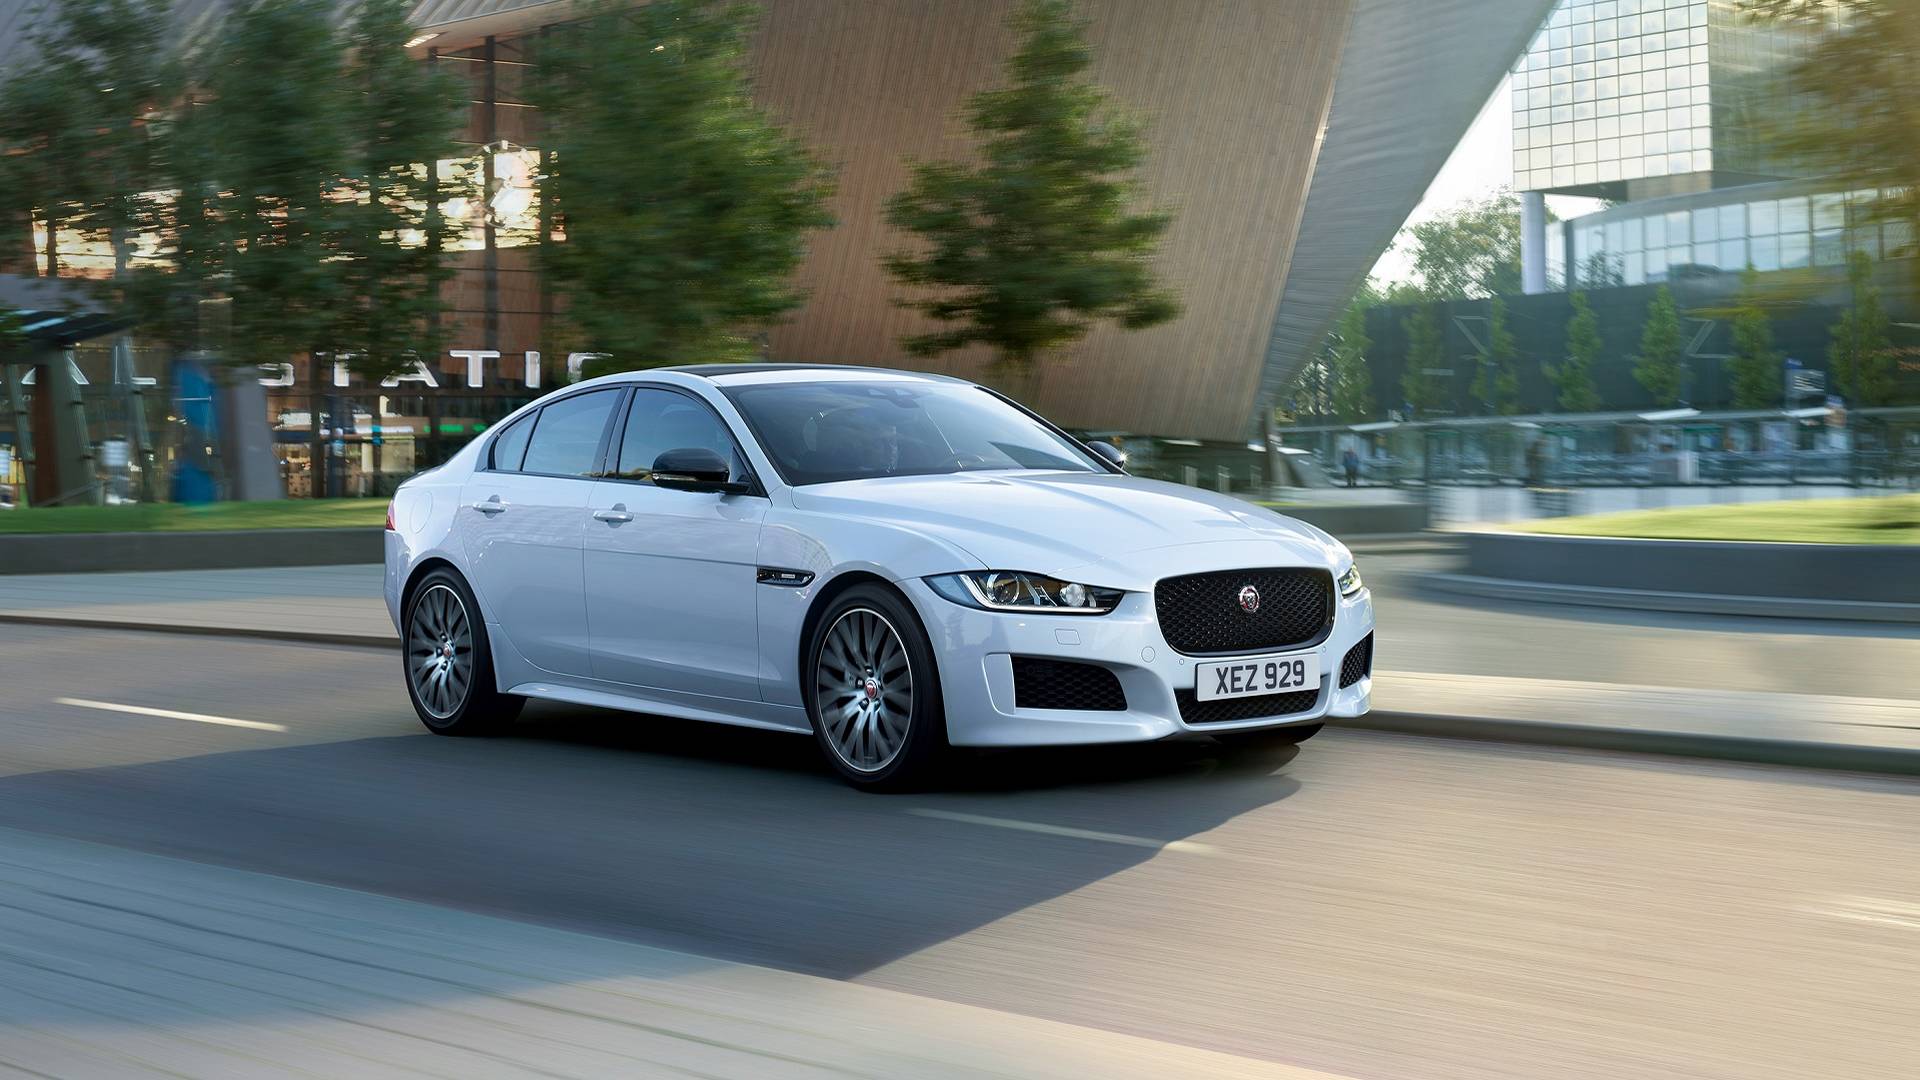 Jaguar XE Landmark Edition Is All About Visual Upgrades